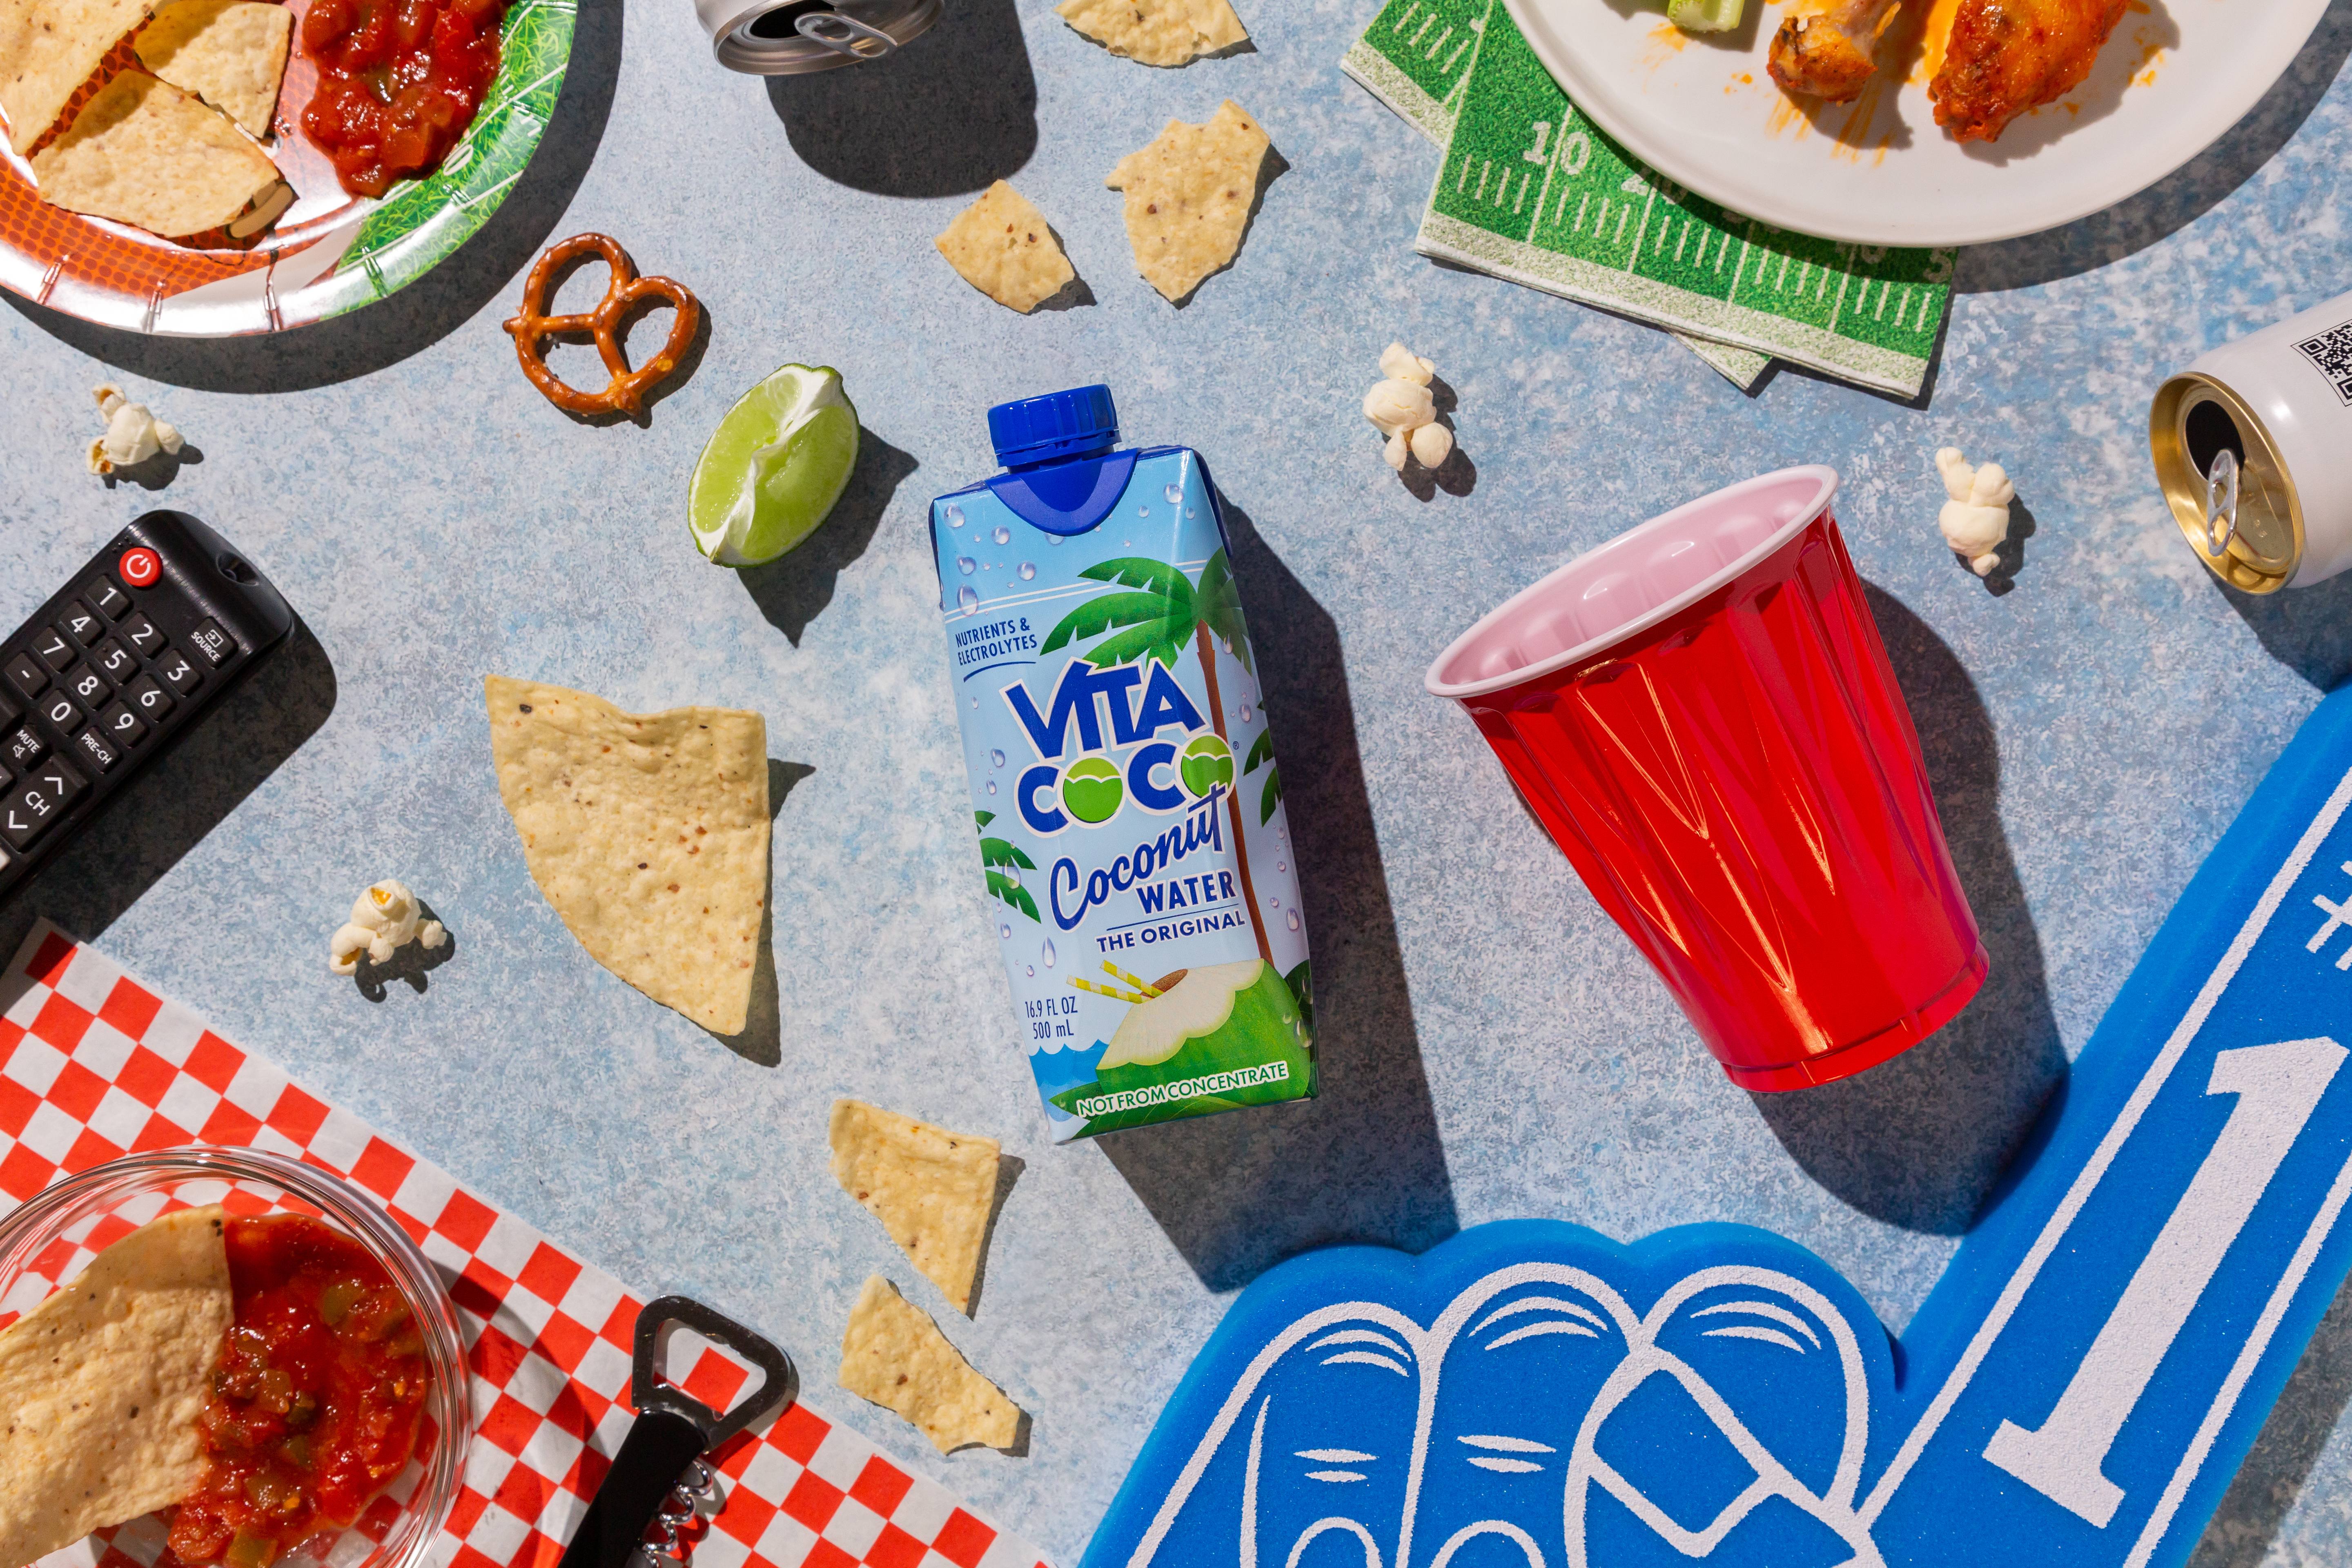 Vita Coco Offers Free Hangover Recovery Nationwide on Monday after the Big Game